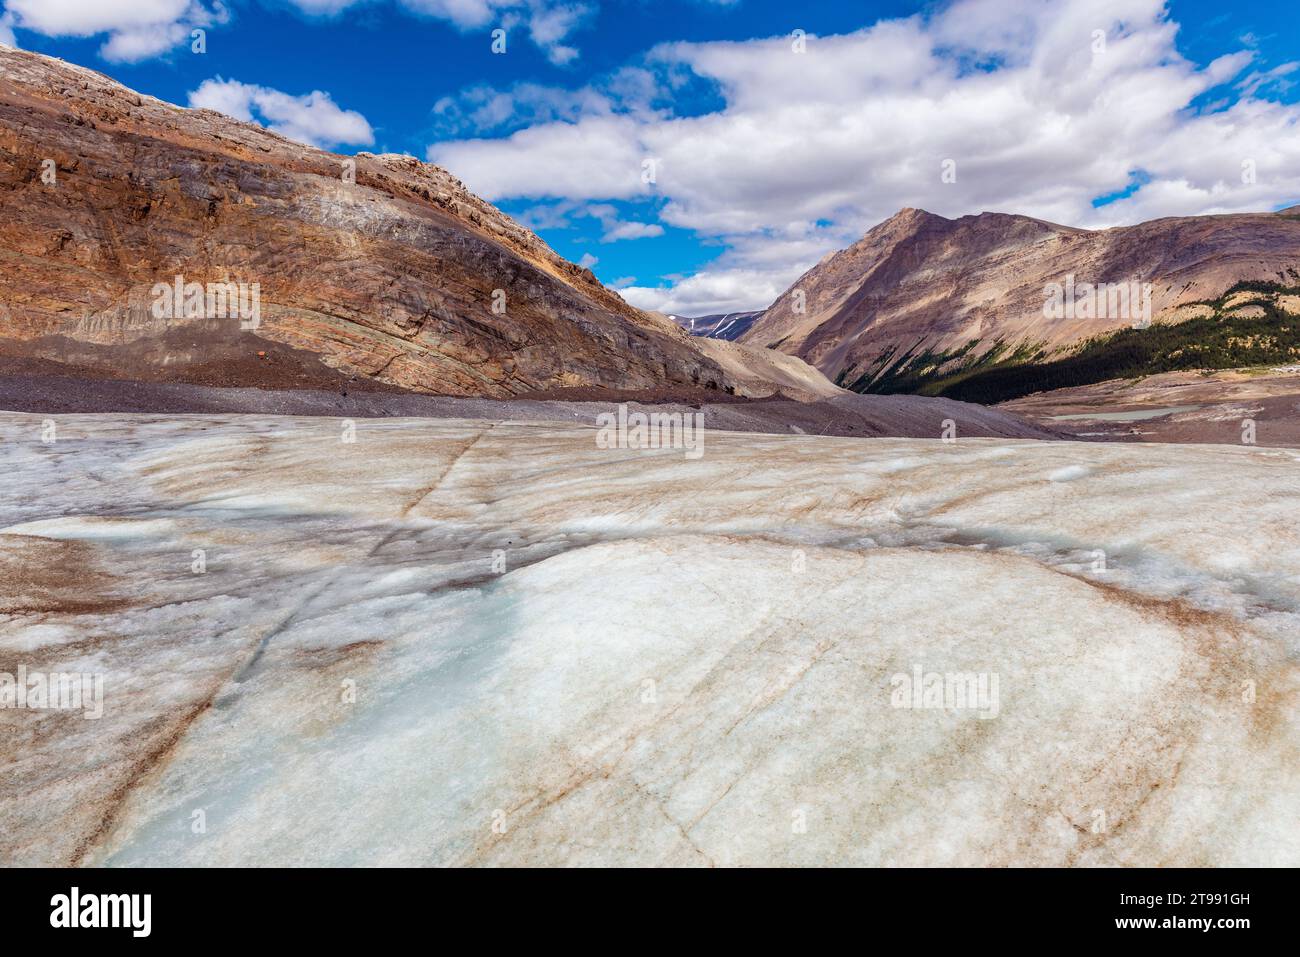 Athabasca glacier landscape seen from glacier walk, Icefields Parkway, Canada. Stock Photo